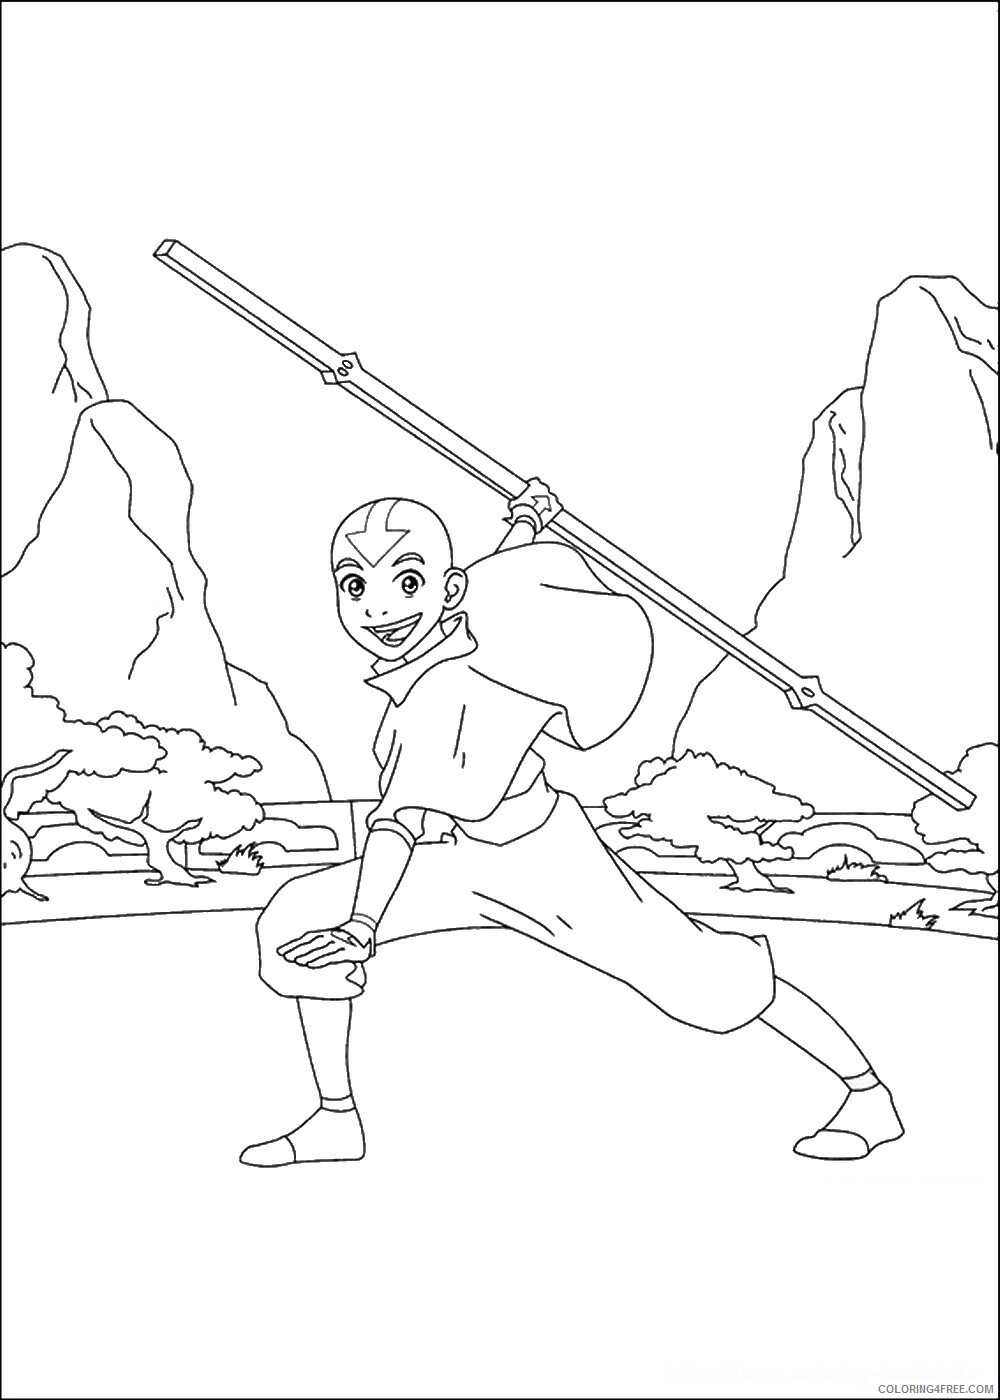 Avatar the Last Airbender Coloring Pages TV Film avatar_cl130 Printable 2020 00288 Coloring4free